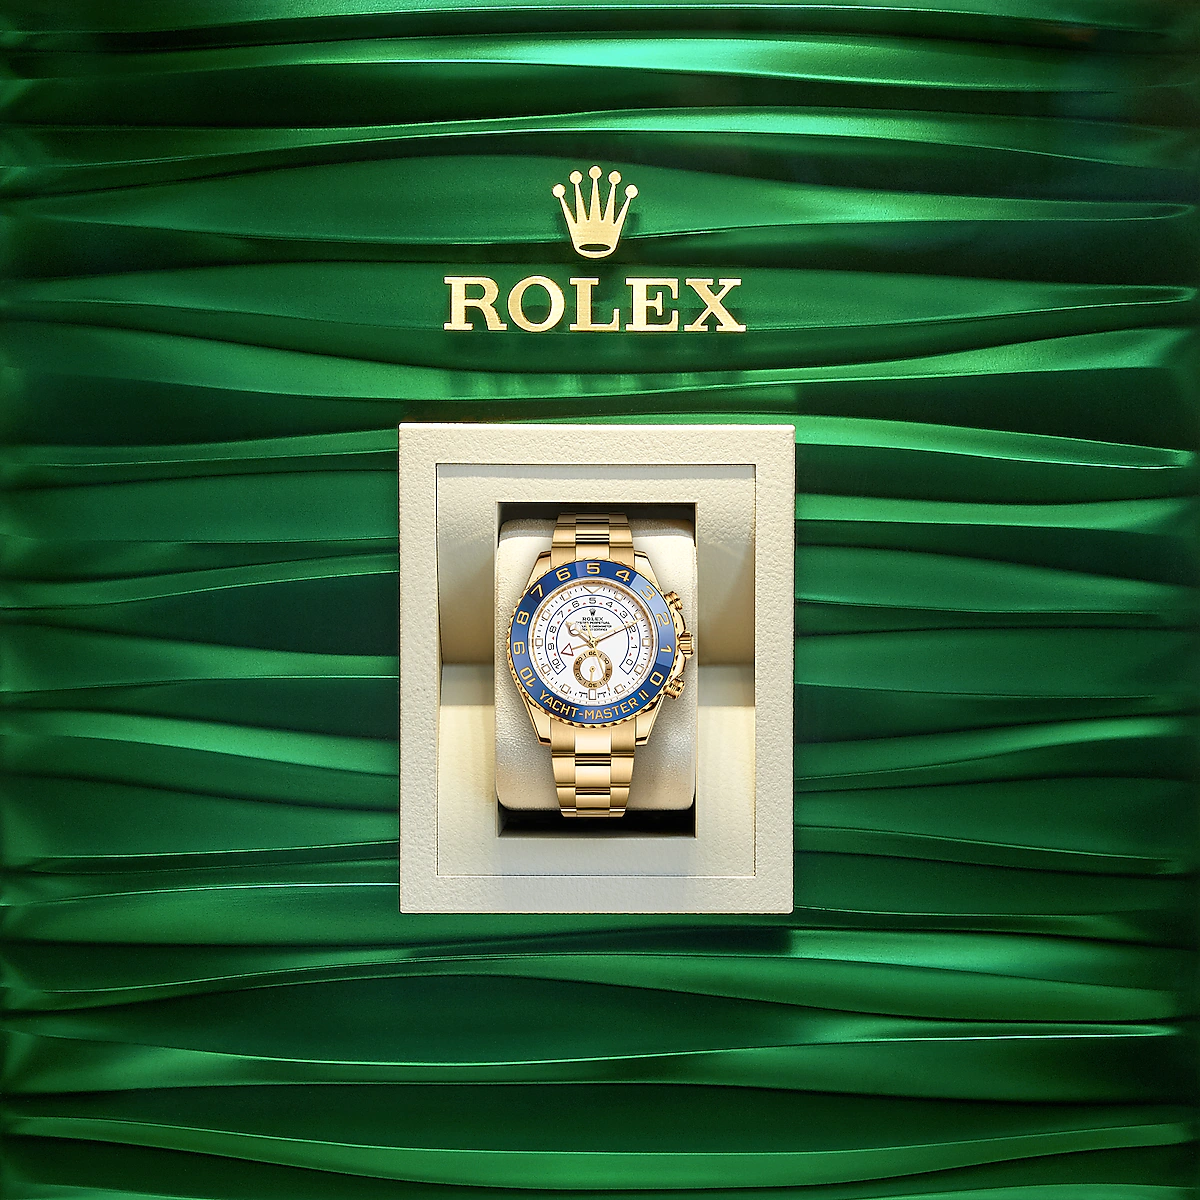 Rolex Yacht-Master II 44 in 18kt Yellow Gold - M116688-0002